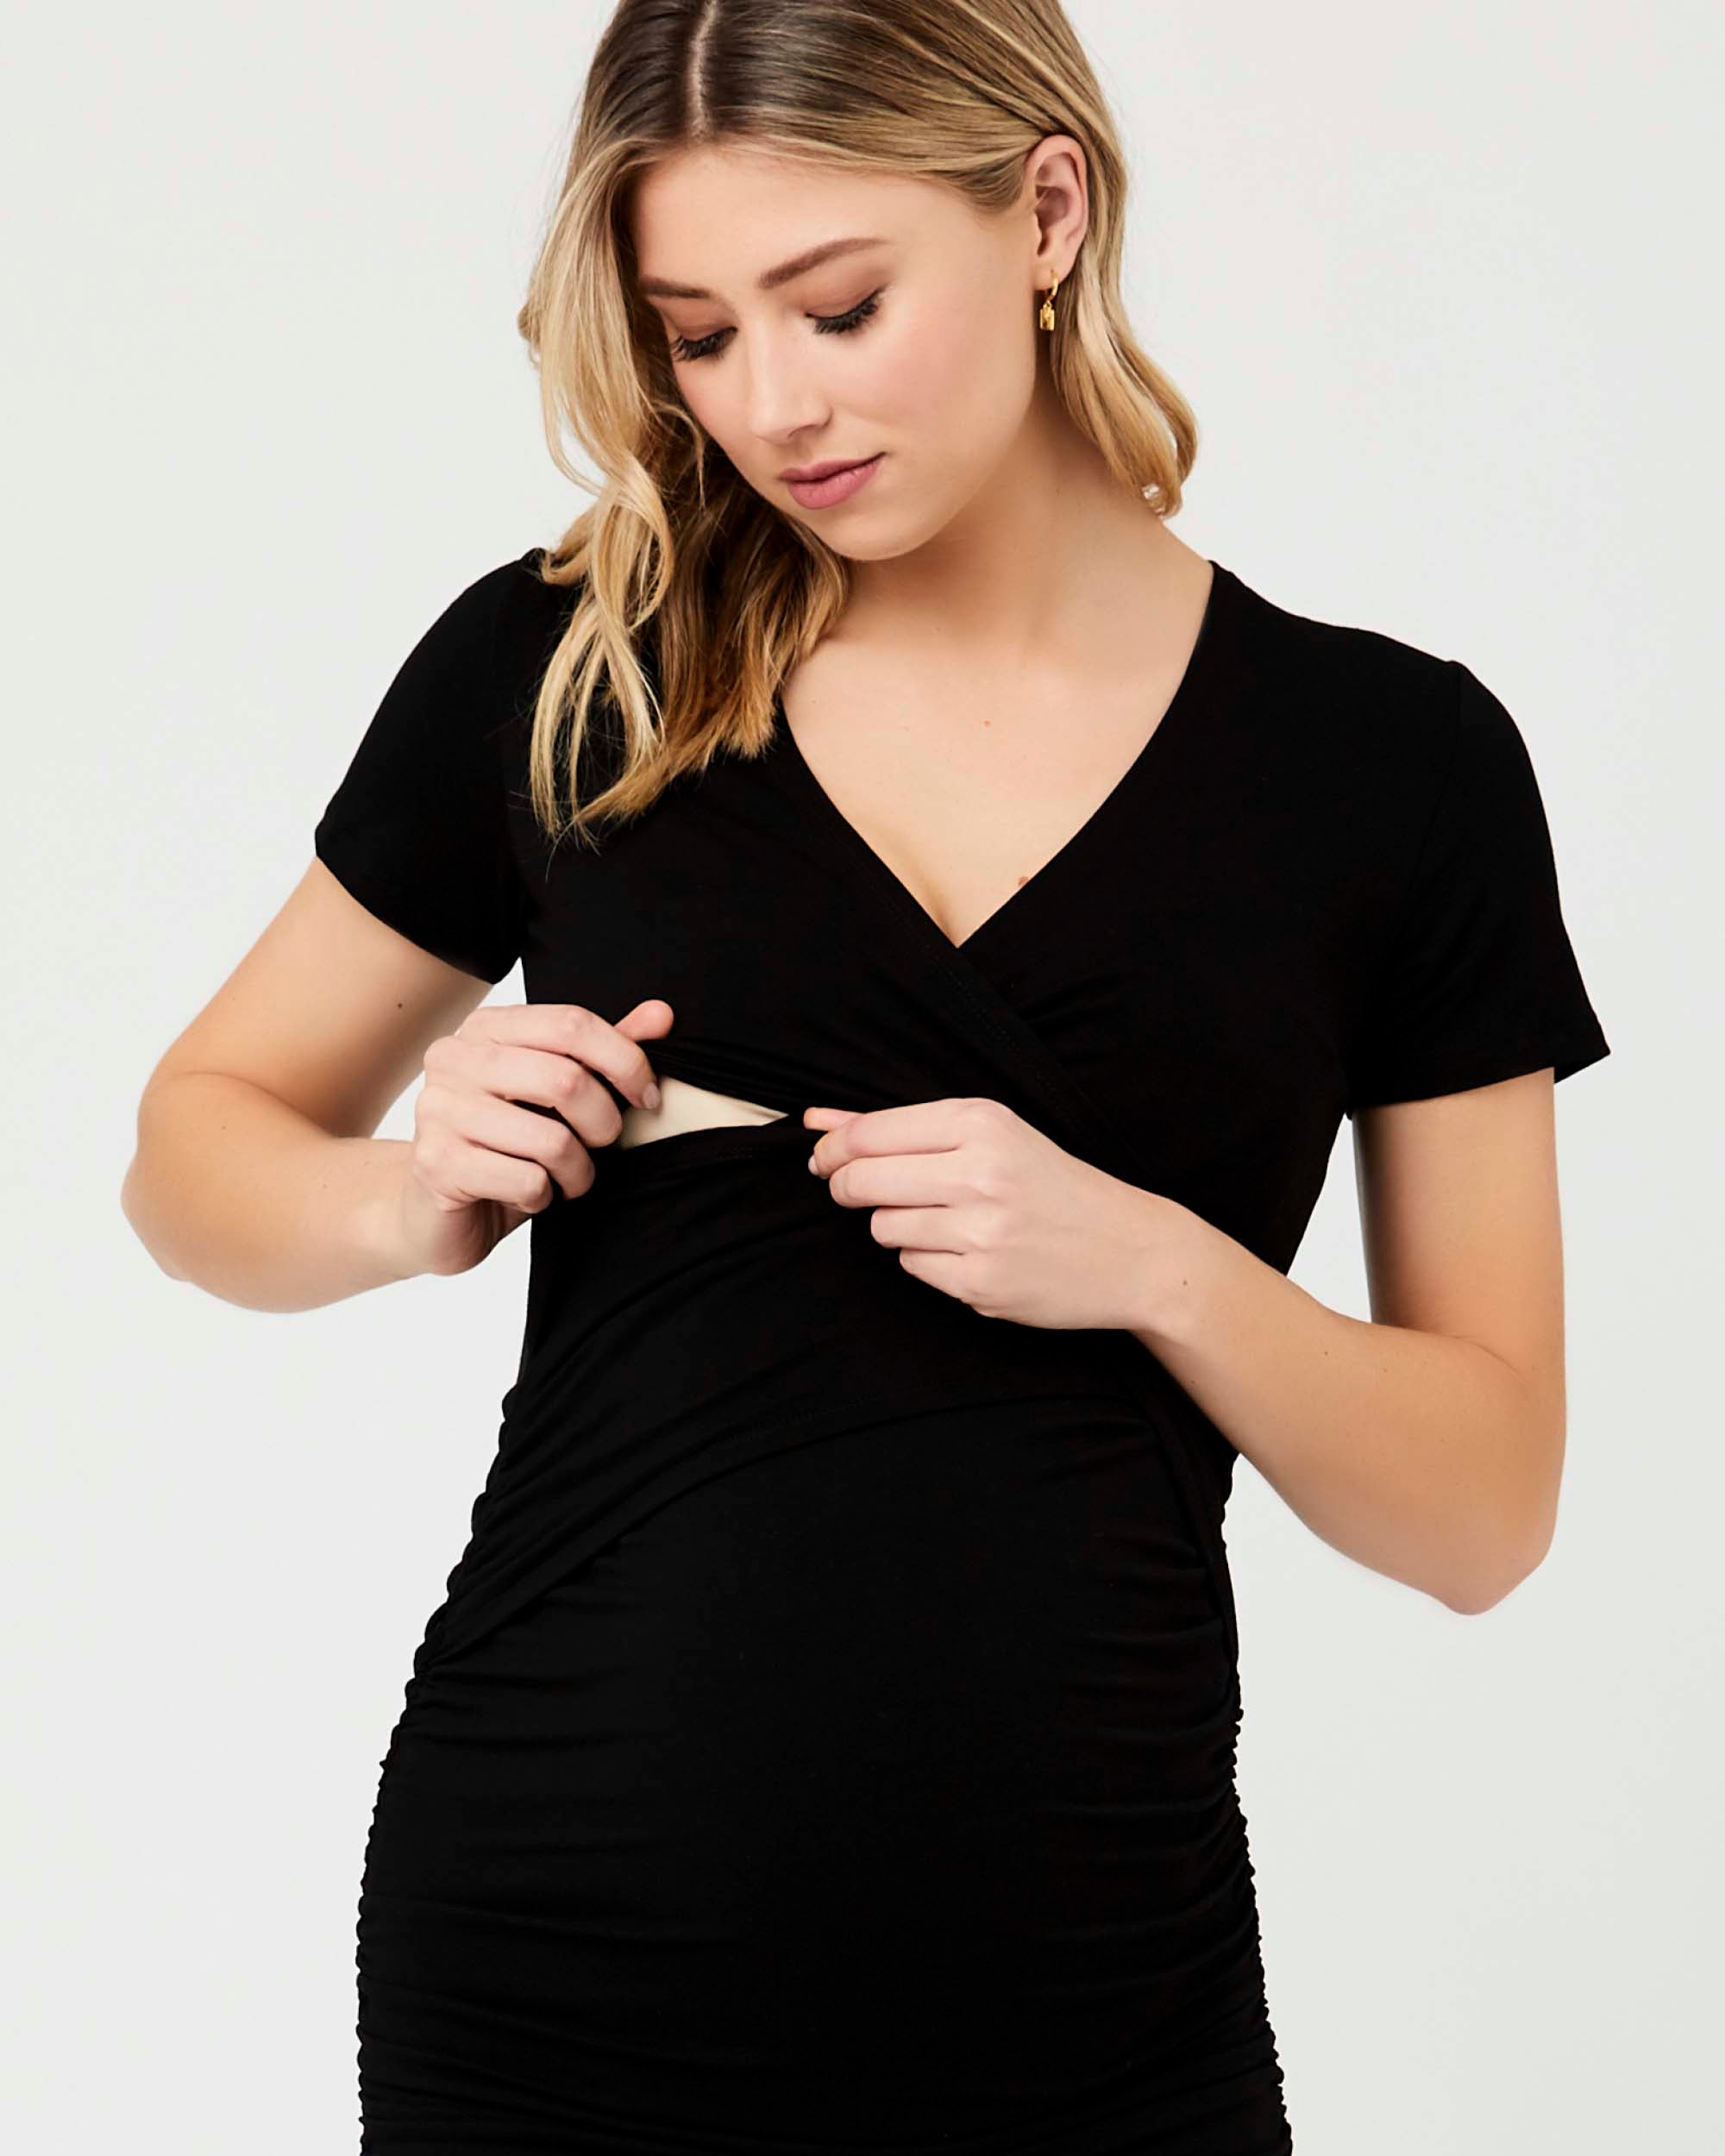 Maternity Dresses, Fashionable for Pregnancy and Beyond